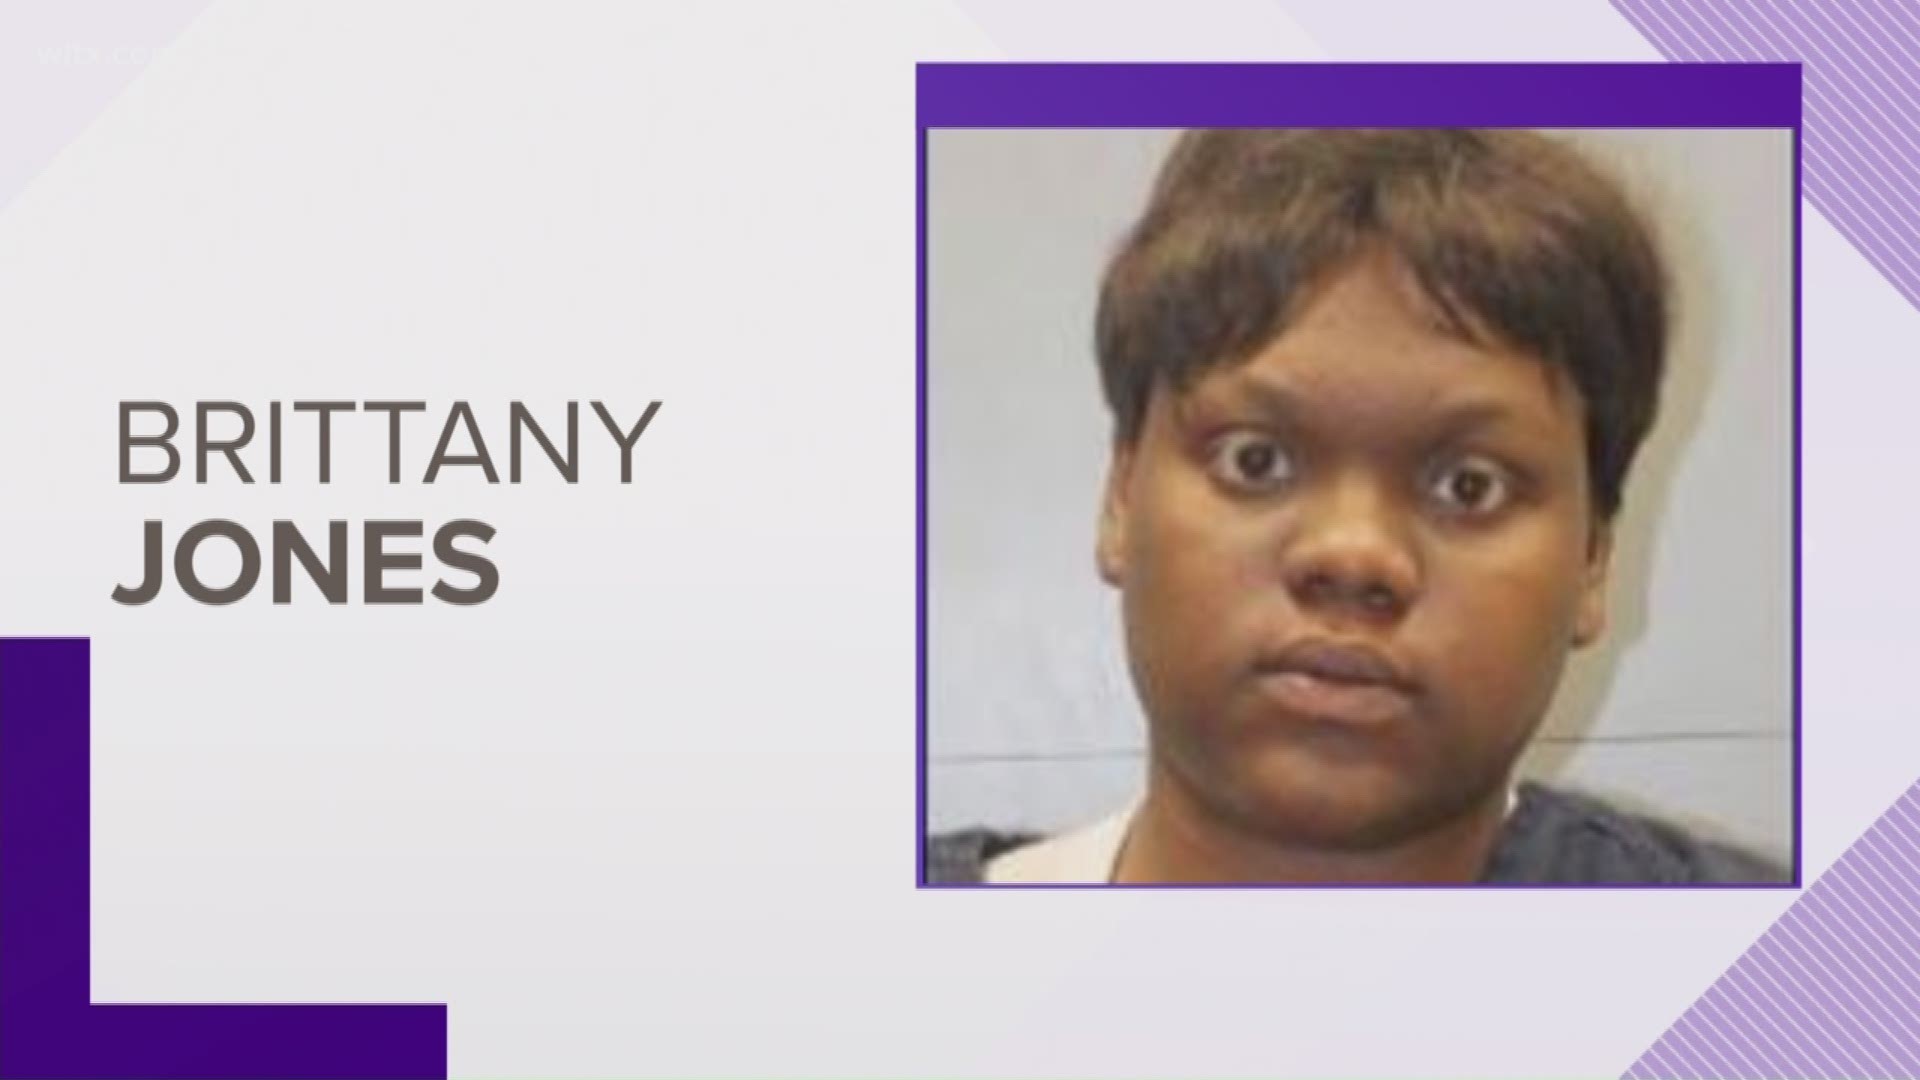 Police say 28-year-old Brittany Jones held a 56-year-old woman against her will for an extended period of time at 100 Lorick Circle on March 19.